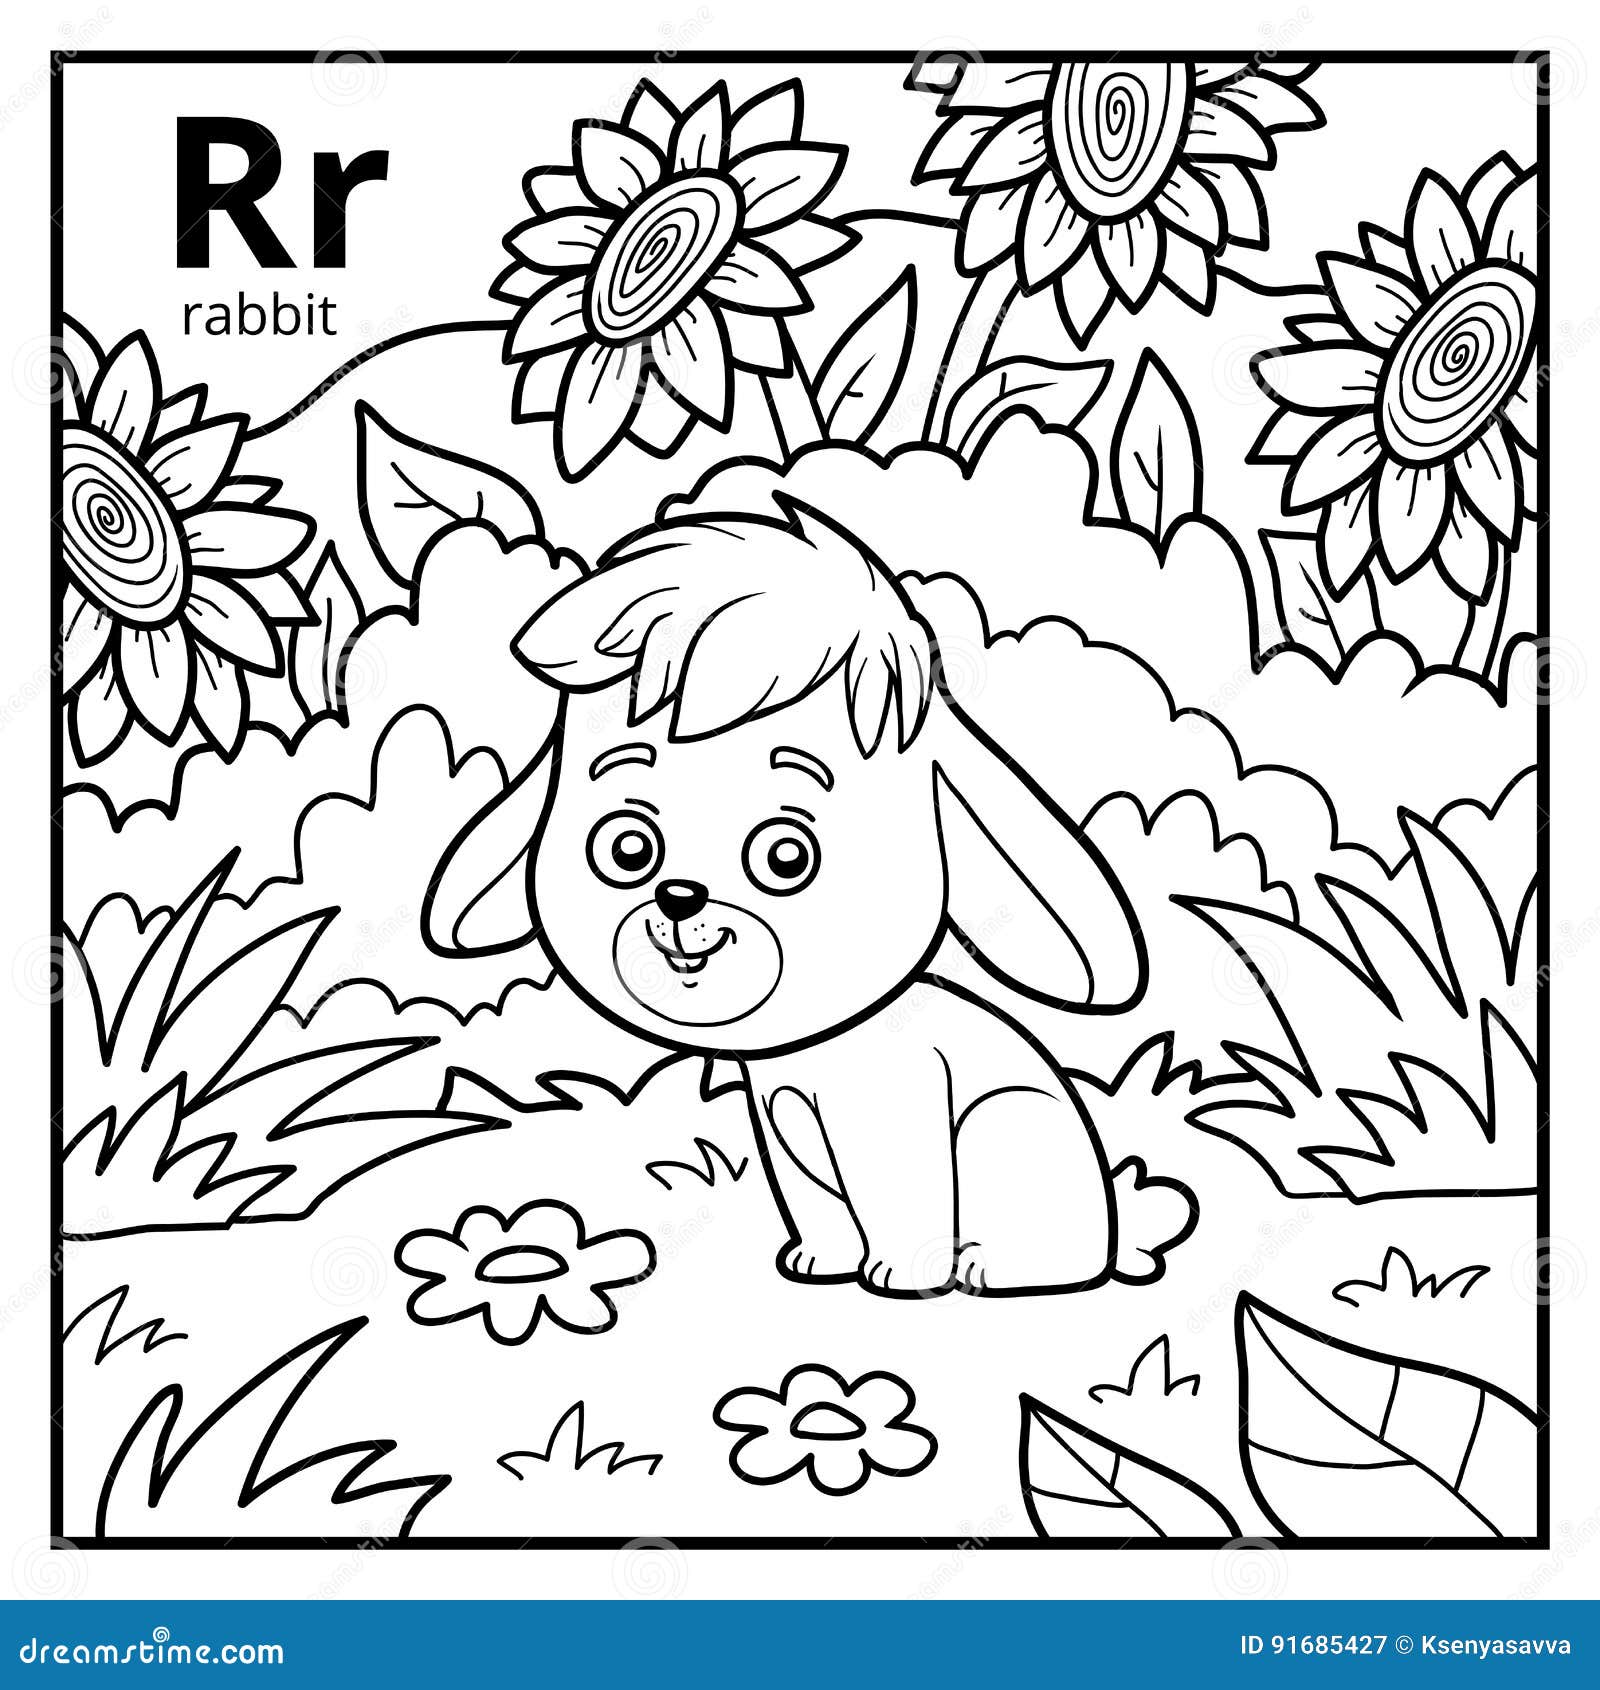 coloring book, colorless alphabet. letter r, rabbit